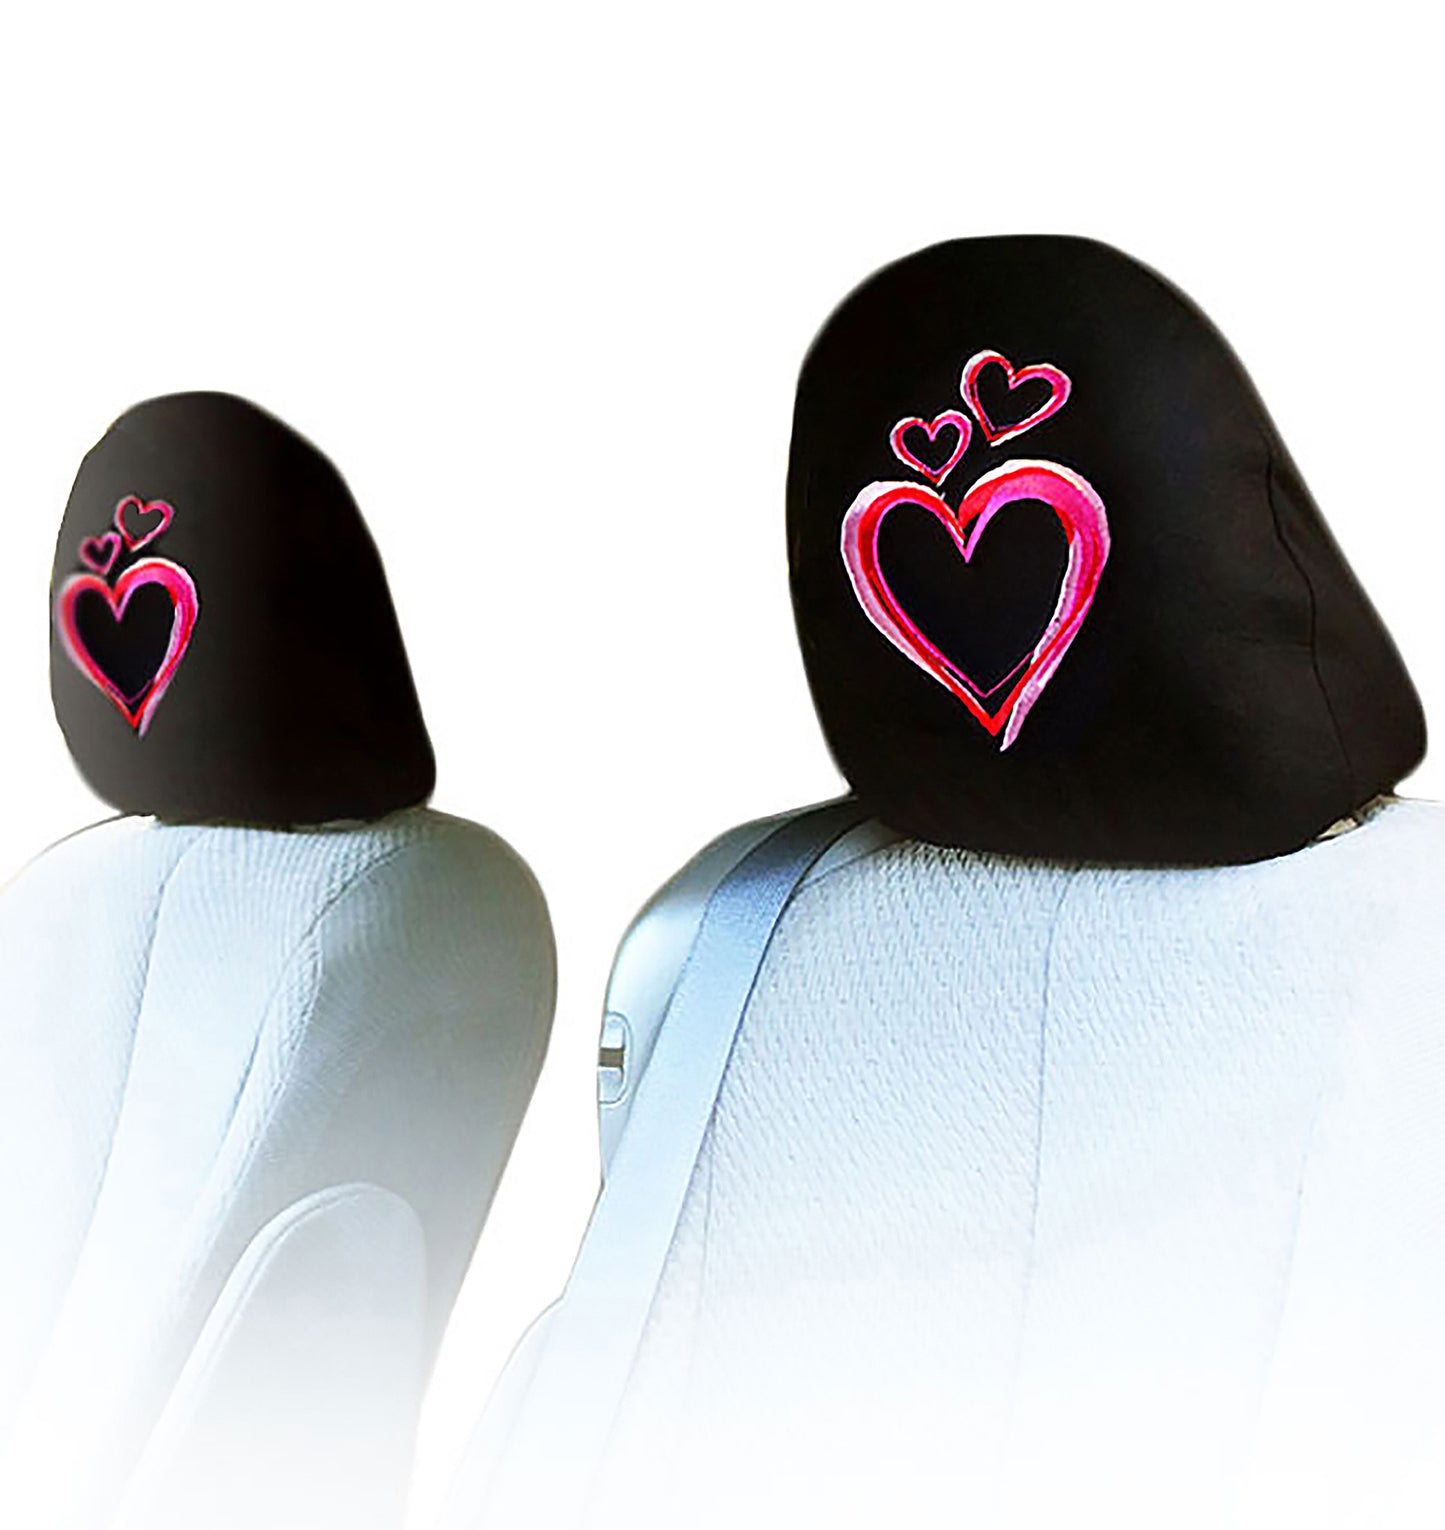 Embroidery Large Pink Heart Design Auto Truck SUV Car Seat Headrest Cover Accessory 1 {air - Yupbizauto